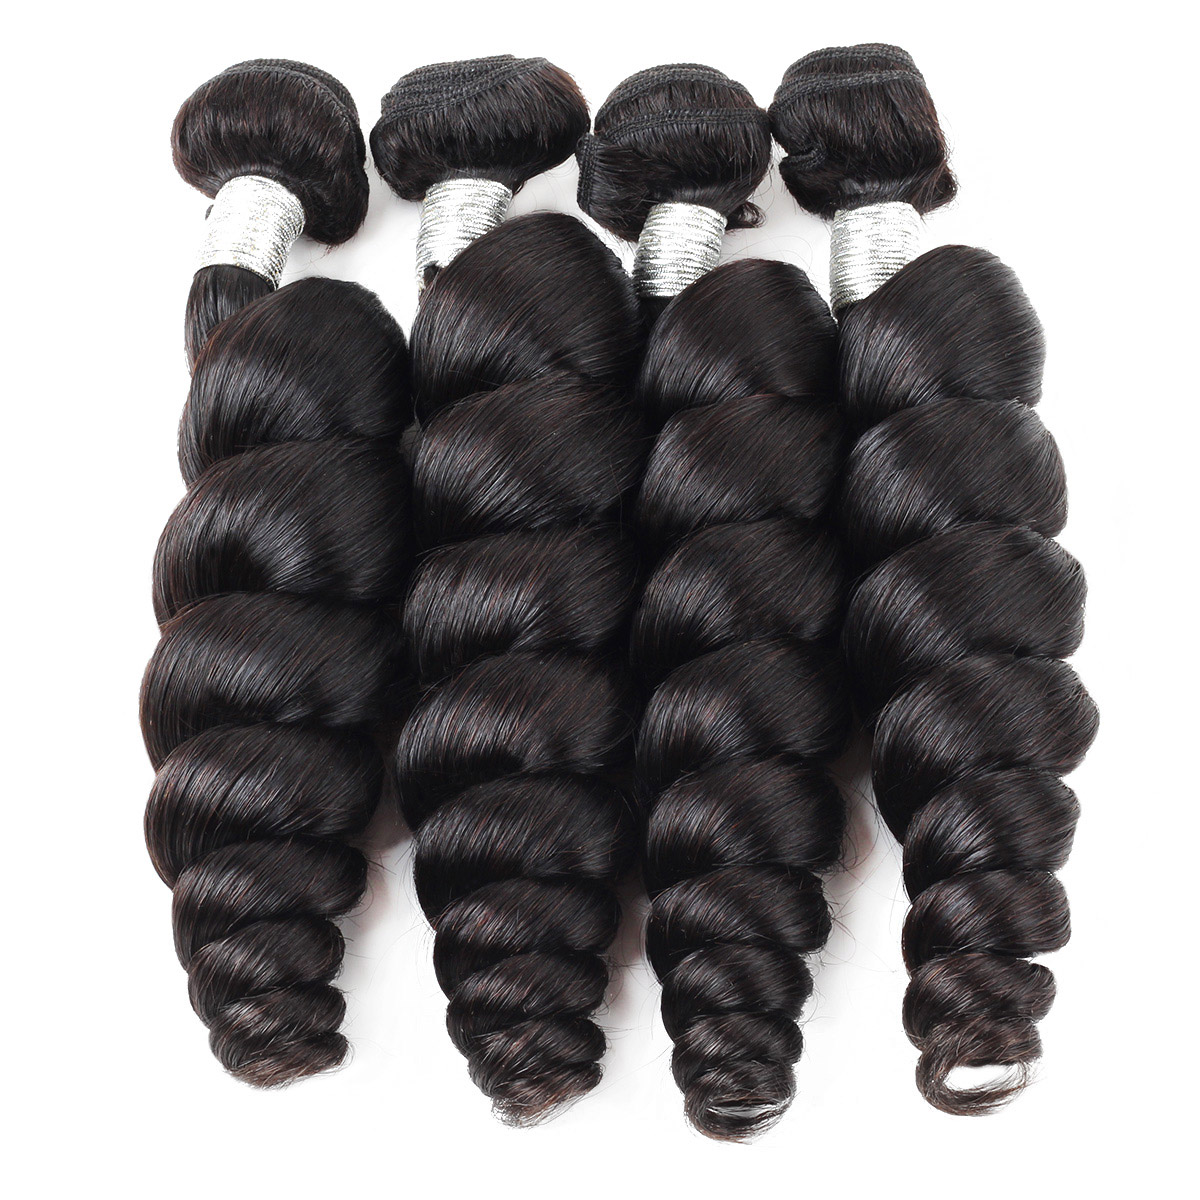 

Ishow 12A Loose Wave Raw Human Hair Extensions 3/4 Bundles for Women All Ages Black 8-28inch Natural Color Brazilian Peruvian Malaysian Indian